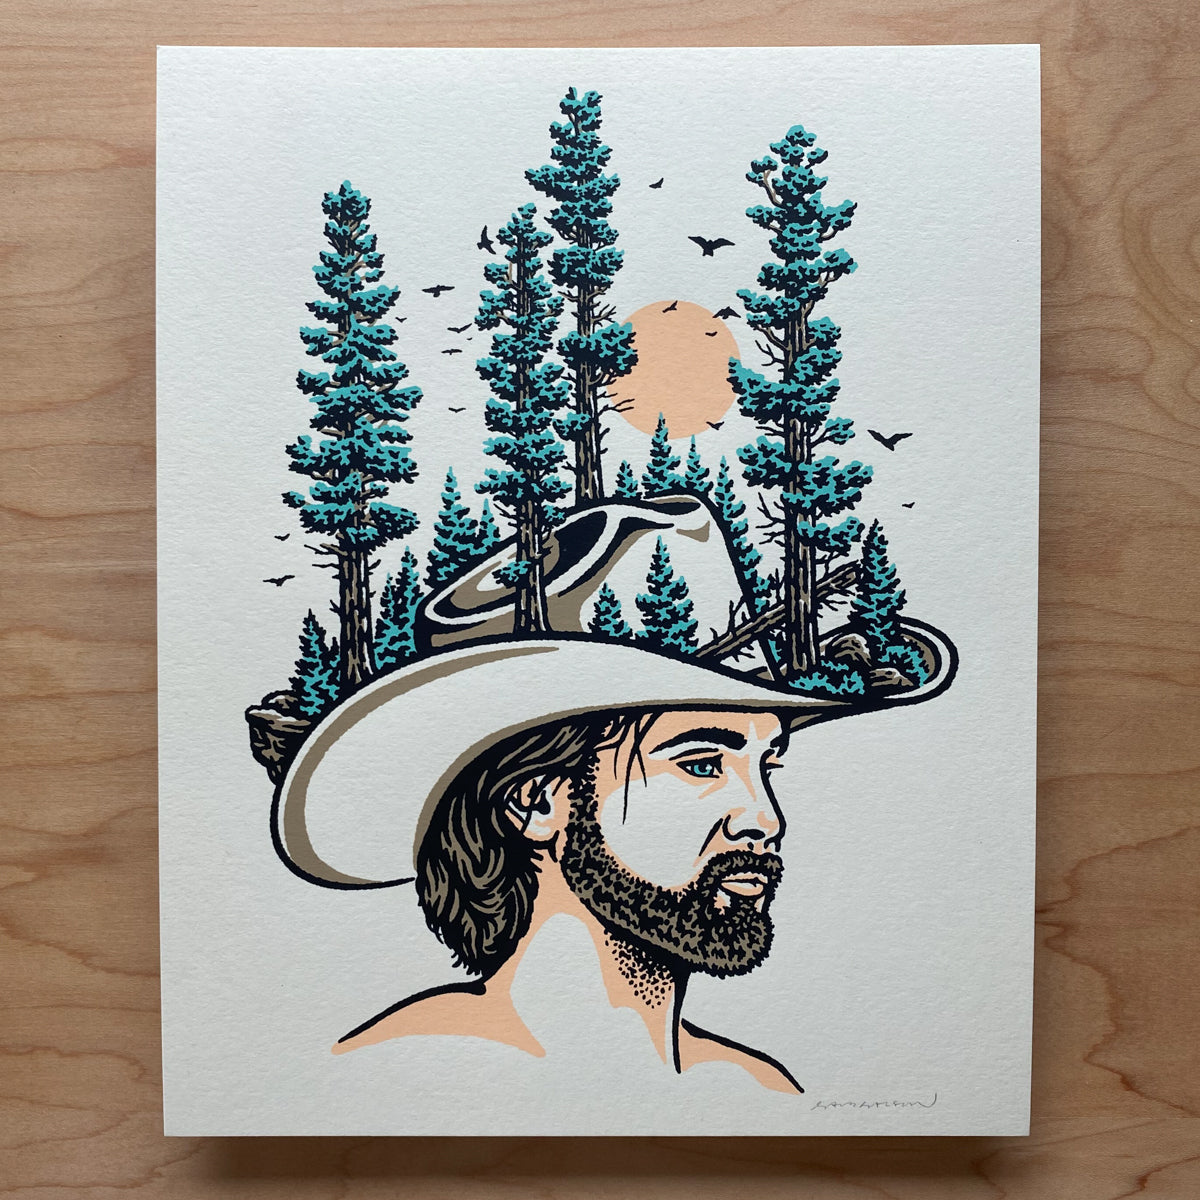 The Woodsman - Signed 8x10in Print #375